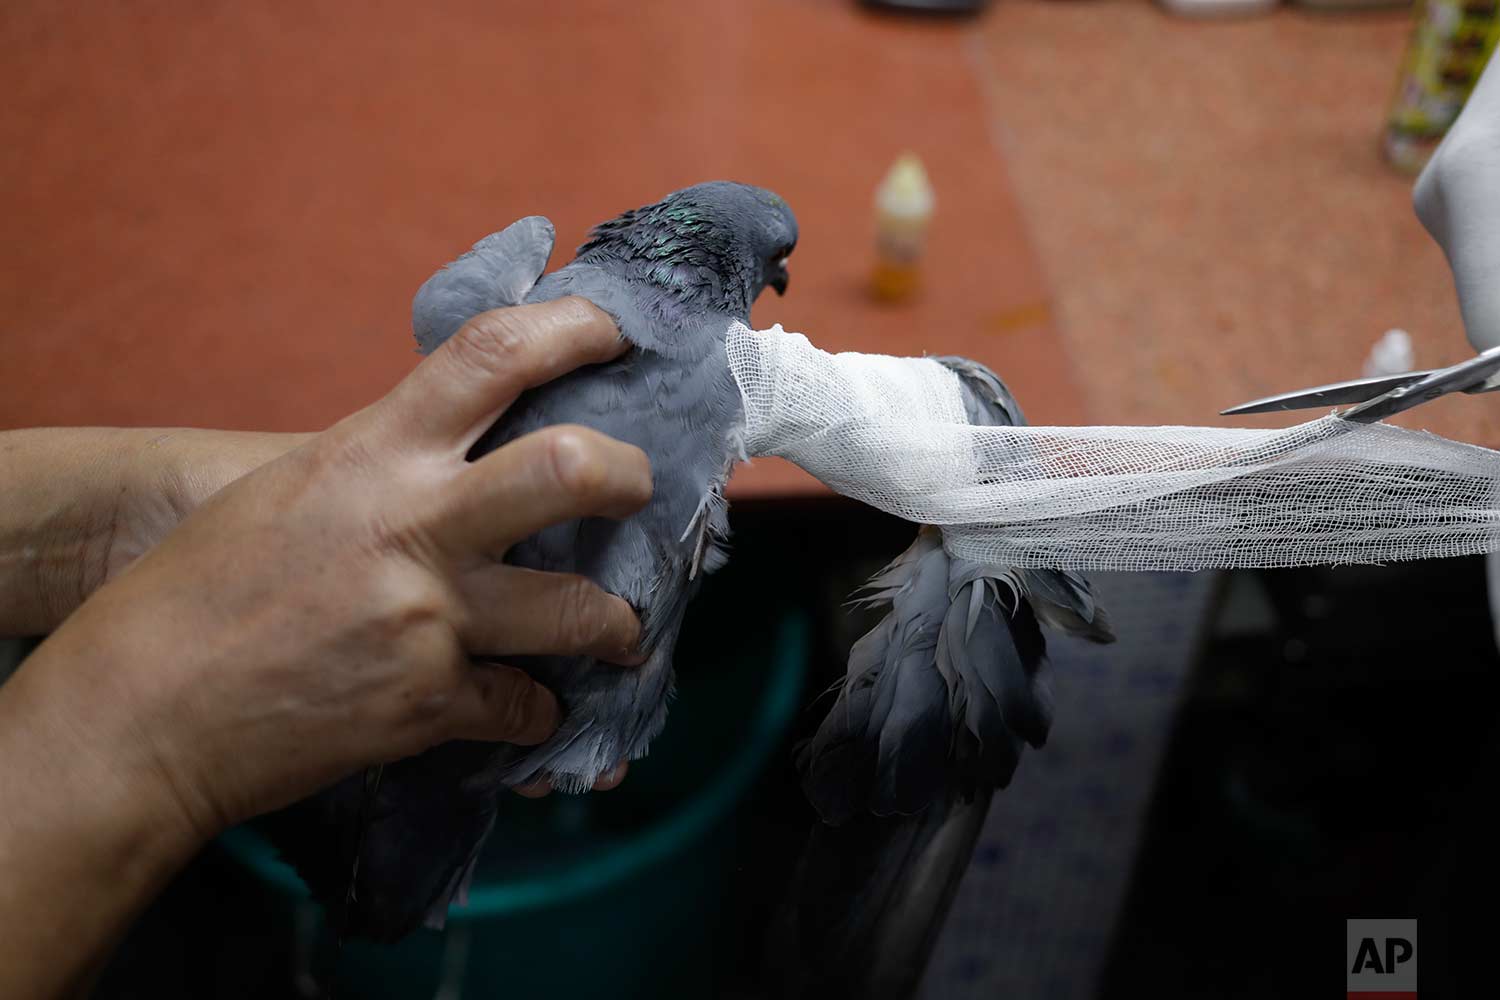  In this Wednesday, Aug. 16, 2017 photo, a pigeon injured by a kite string is treated at Charity Birds Hospital in New Delhi, India. (AP Photo/Tsering Topgyal) 